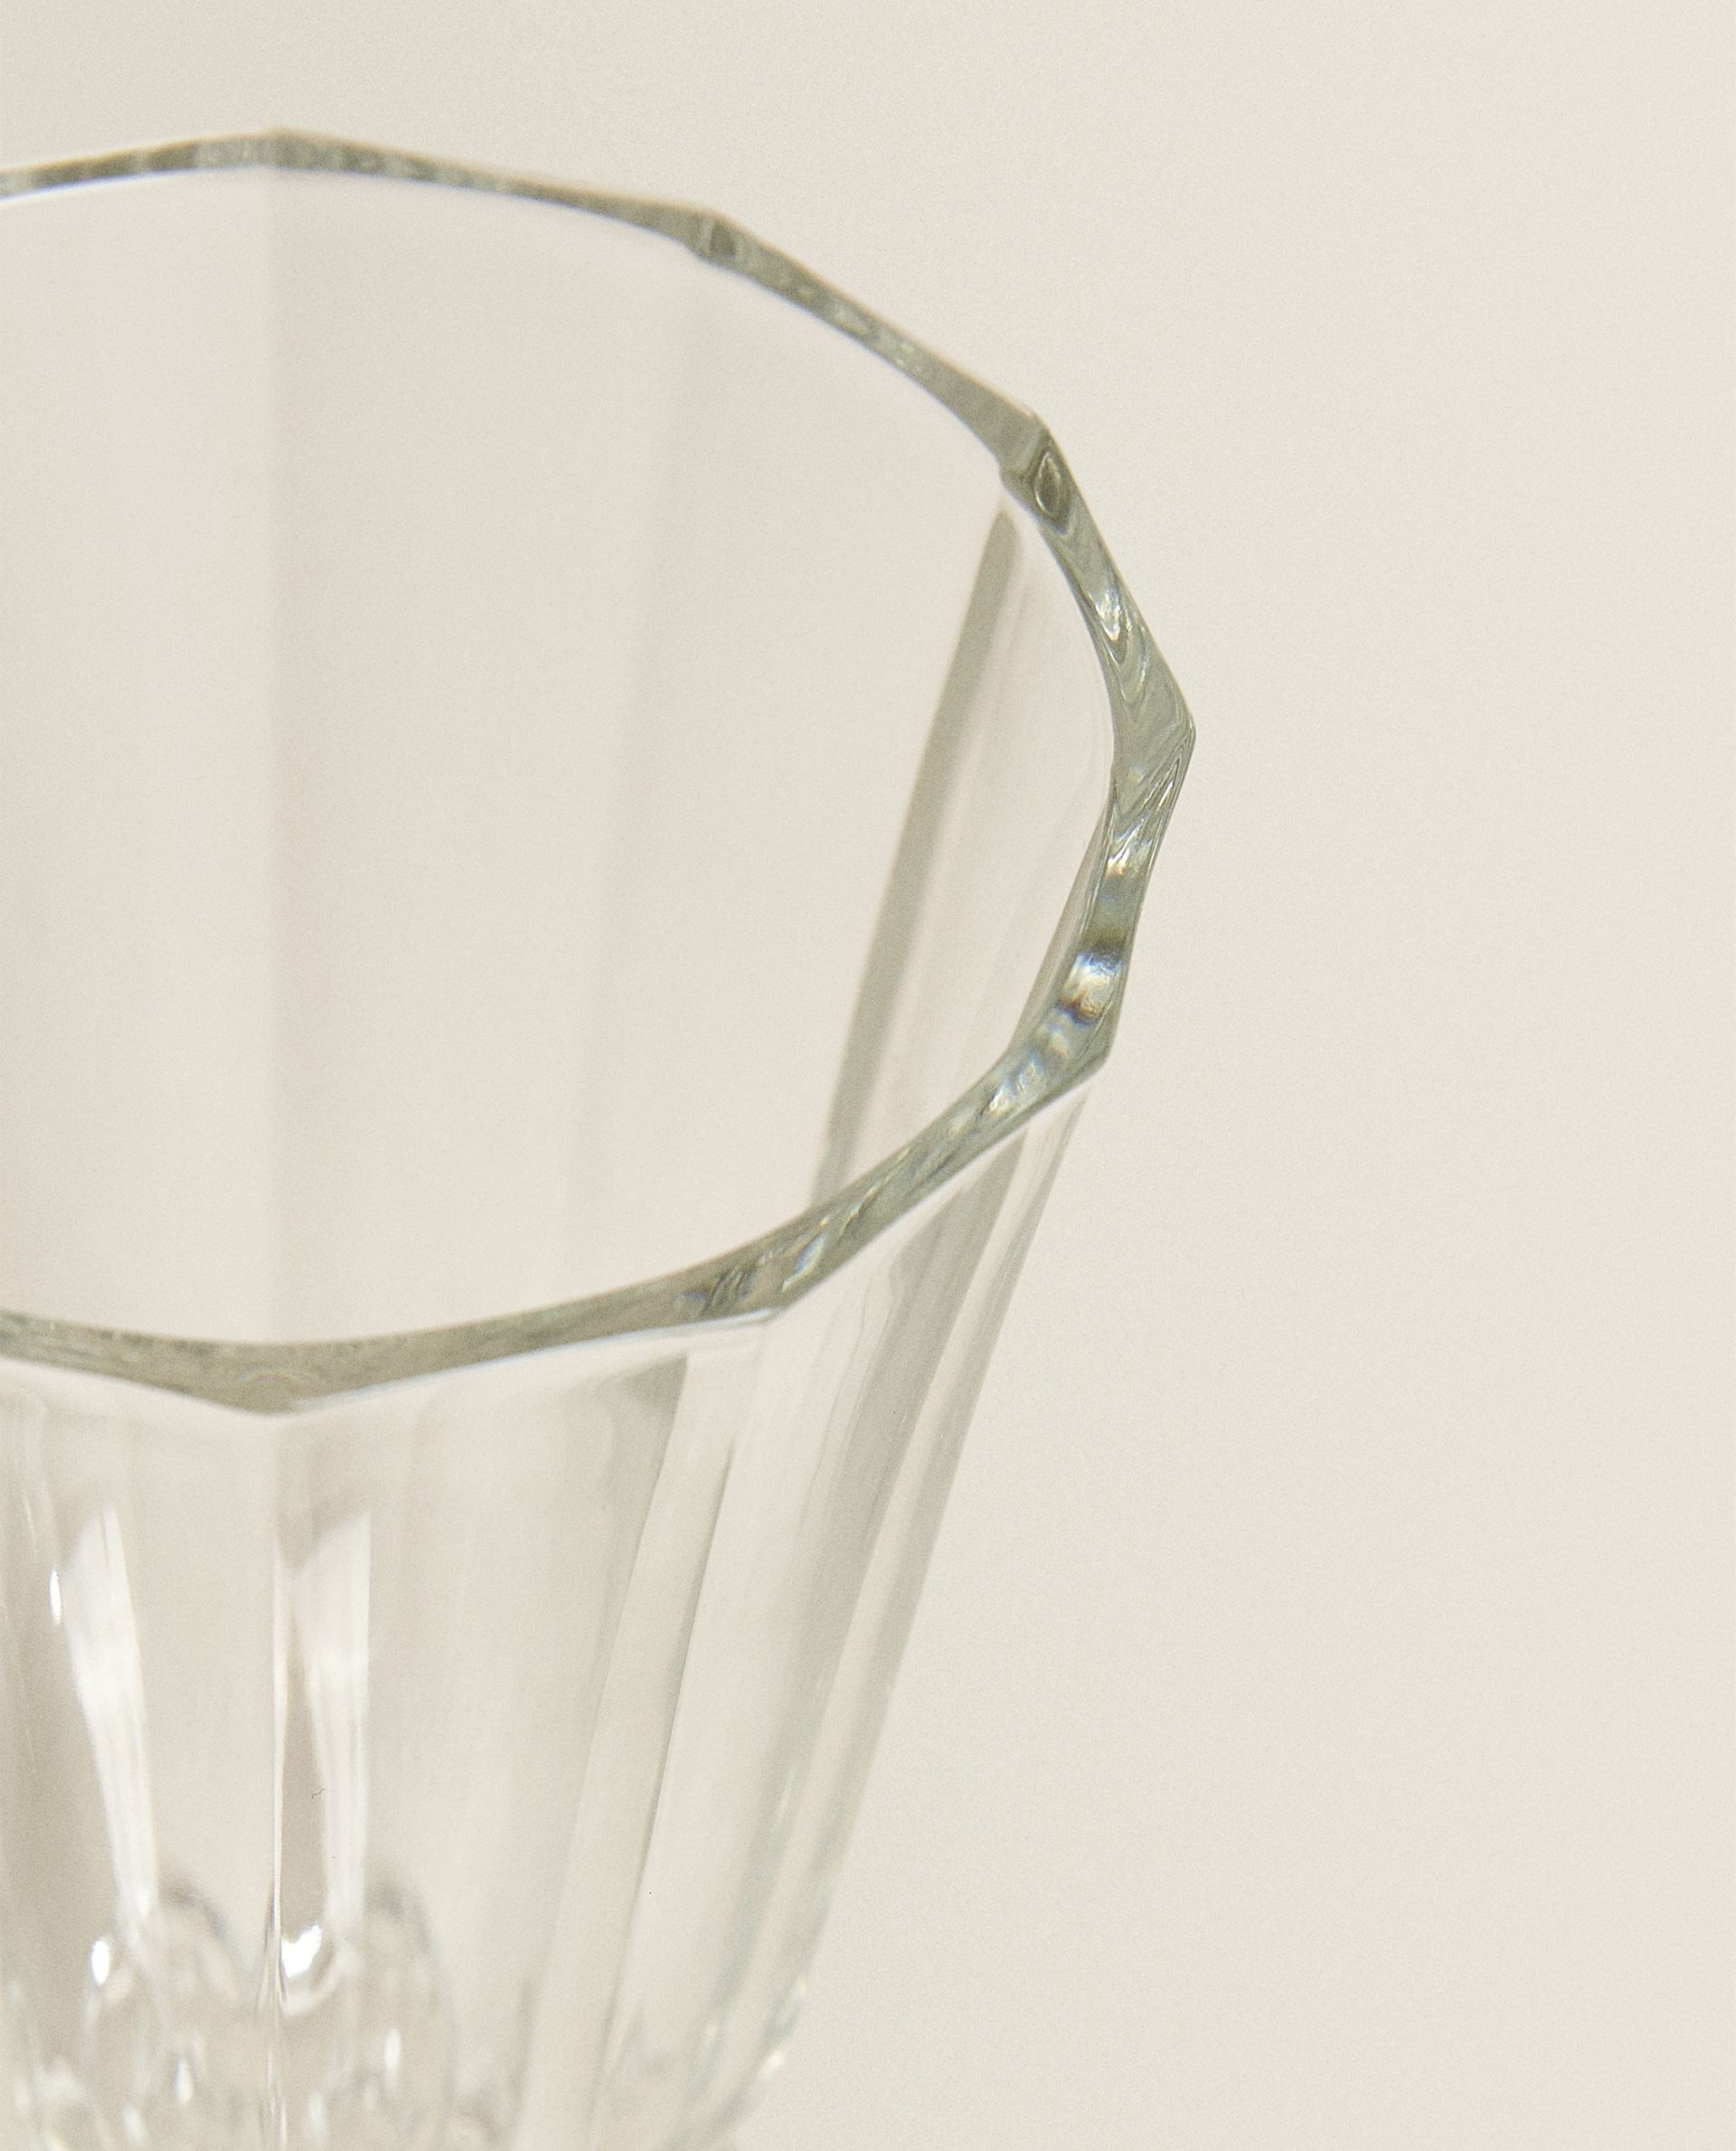 RAISED FACETED WINE GLASS  Zara Home United States of America